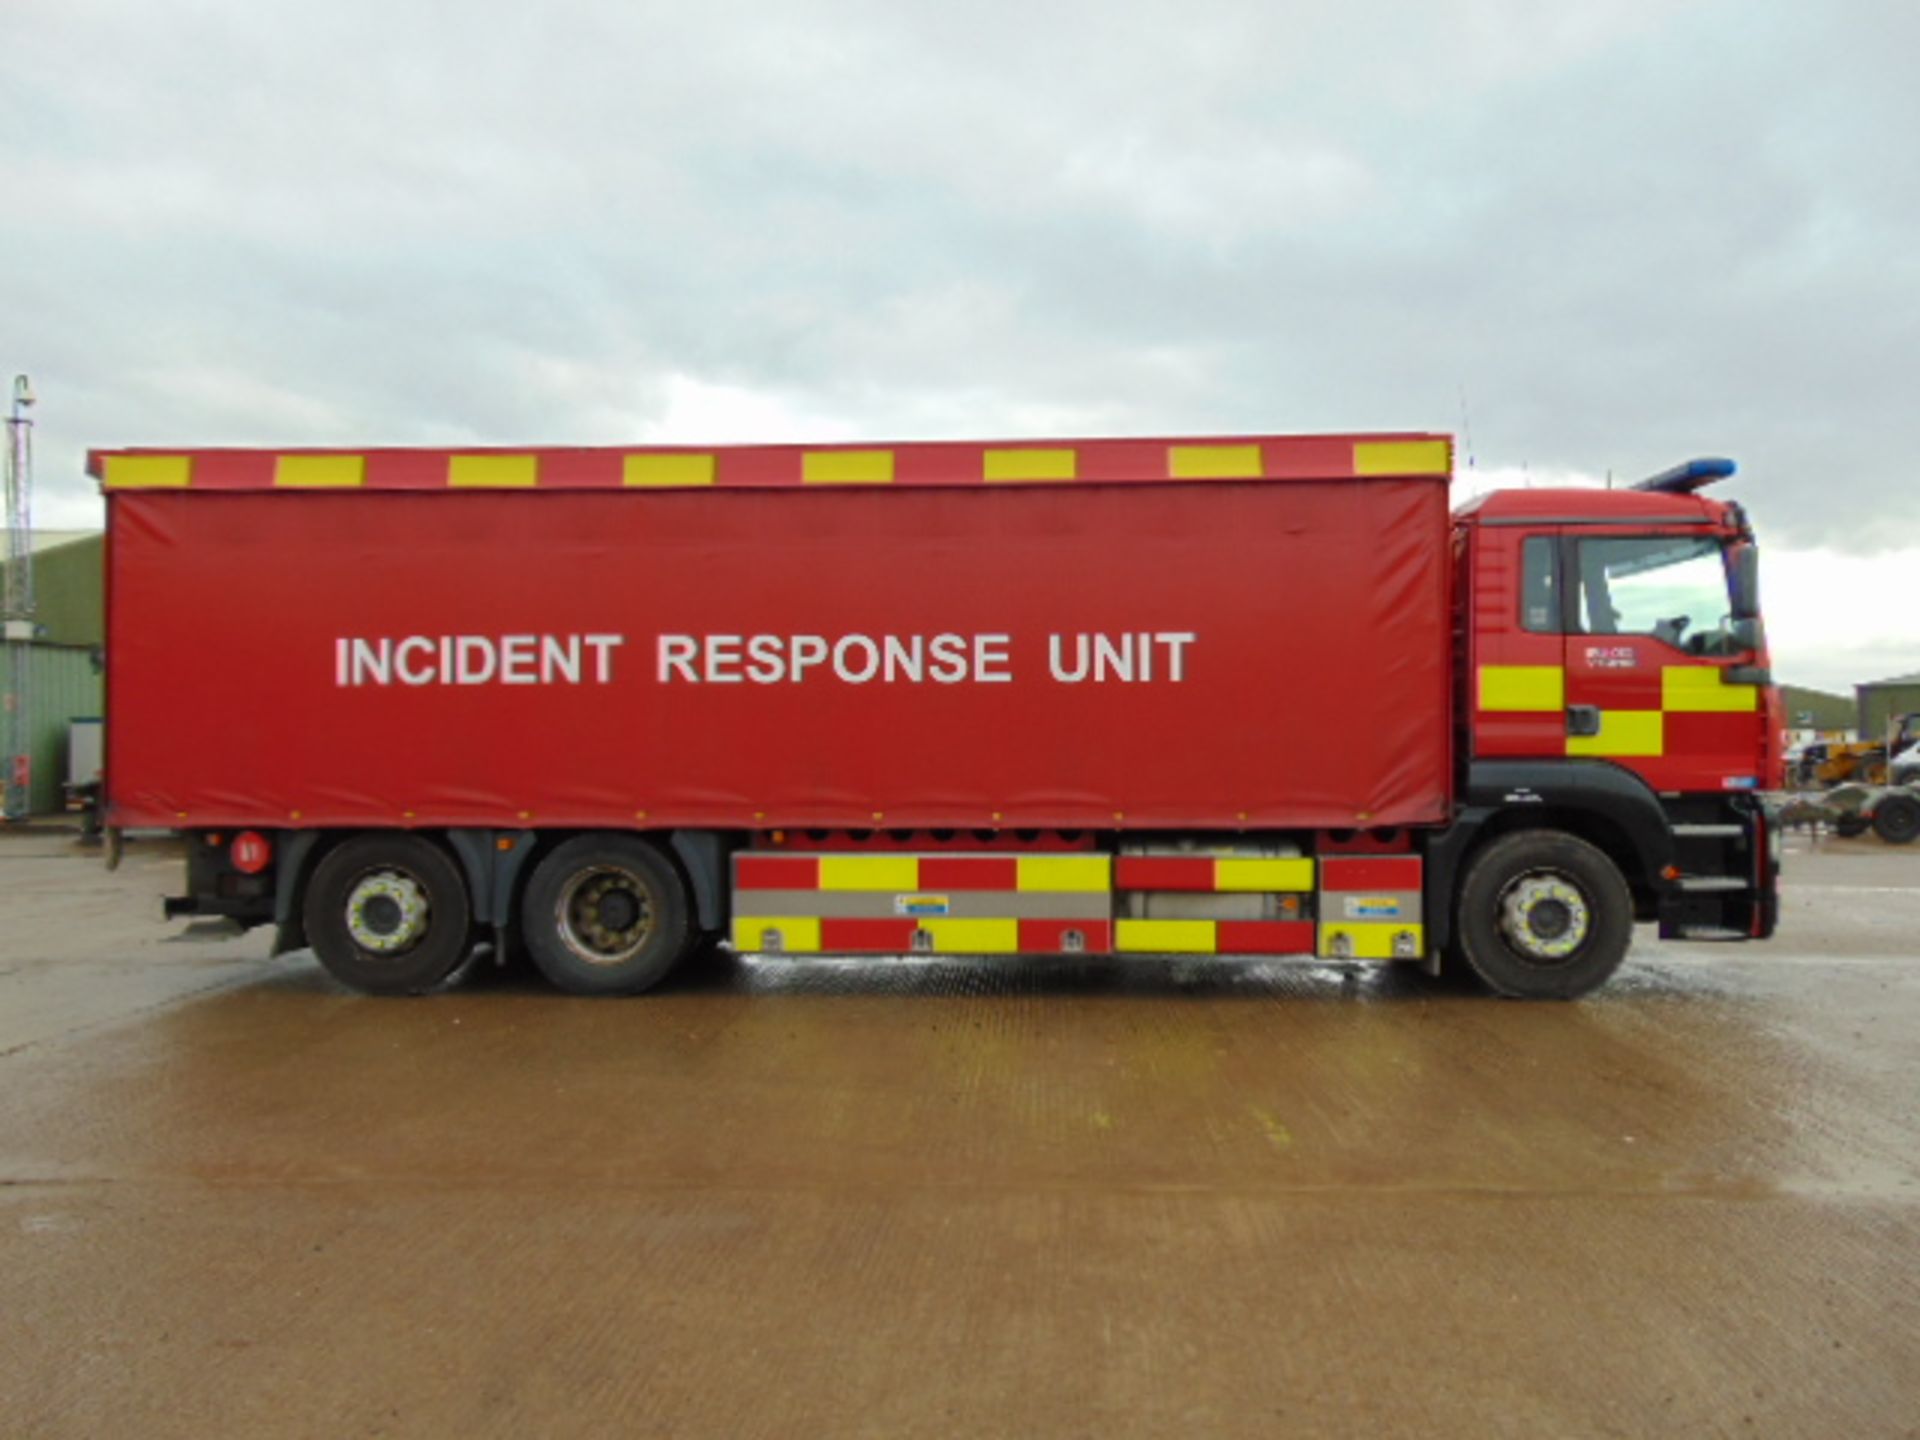 2004 MAN TG-A 6x2 Incident Support Unit - Image 5 of 26